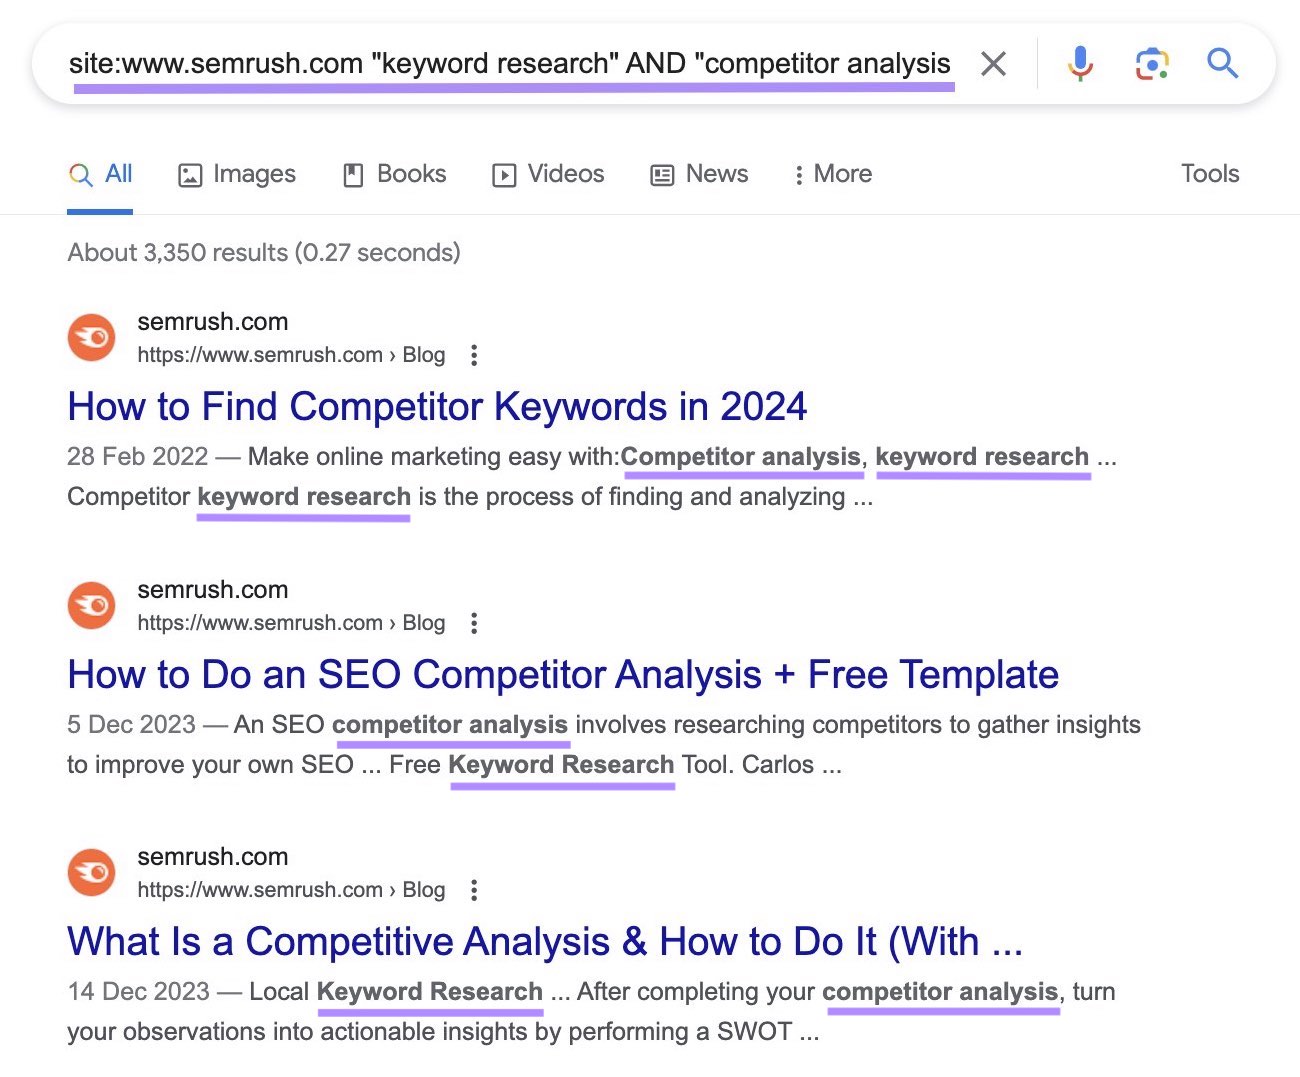 www.semrush.com "keyword research" AND "competitor analysis"” tract  search